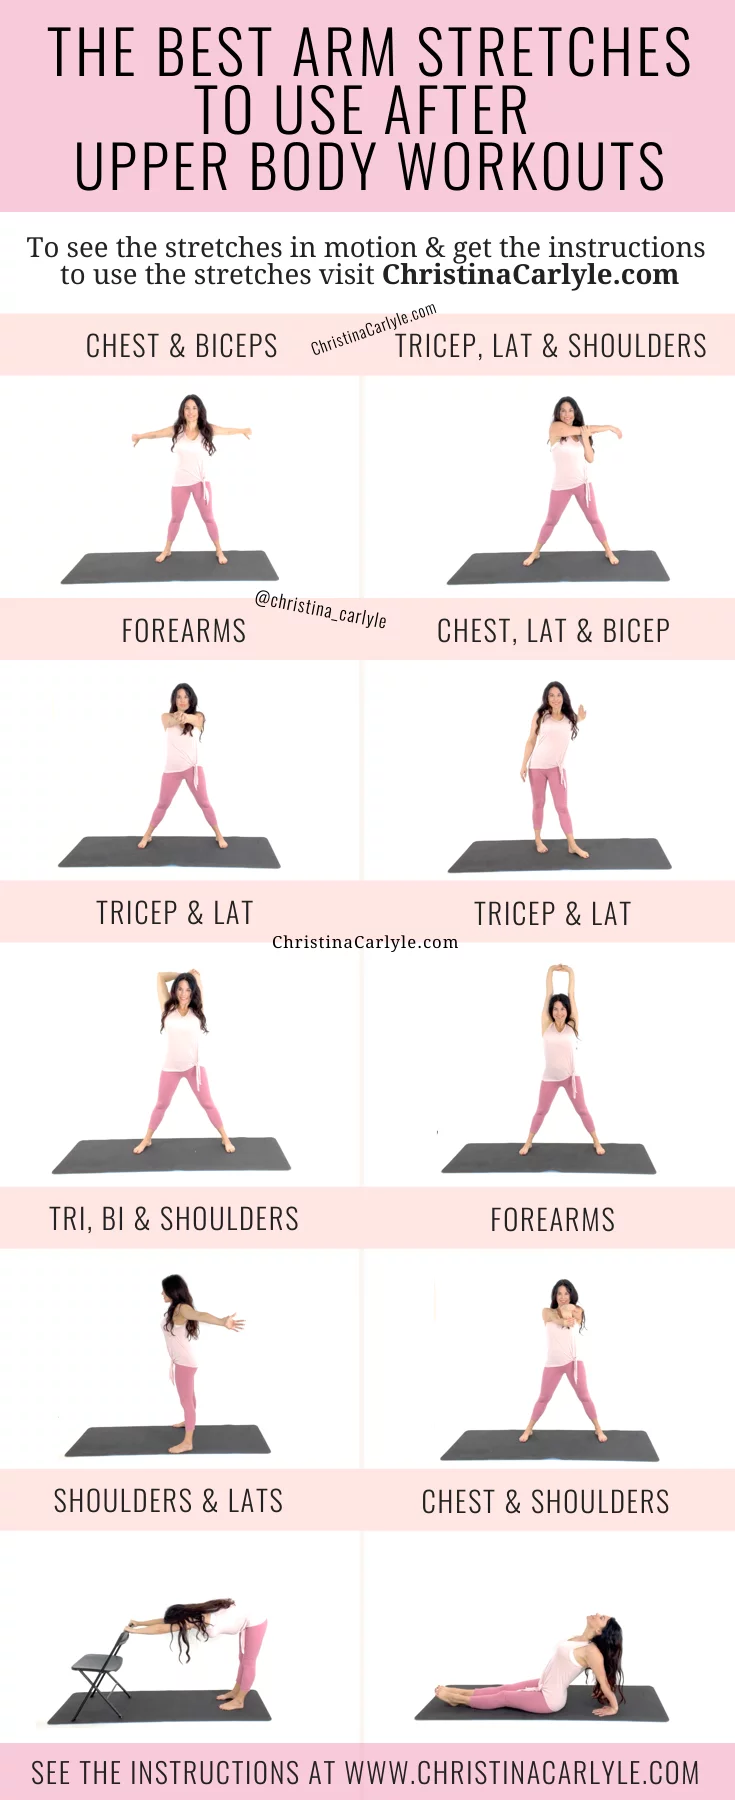 10 Best Arm Stretches to Do after Upper Body Workouts - Christina